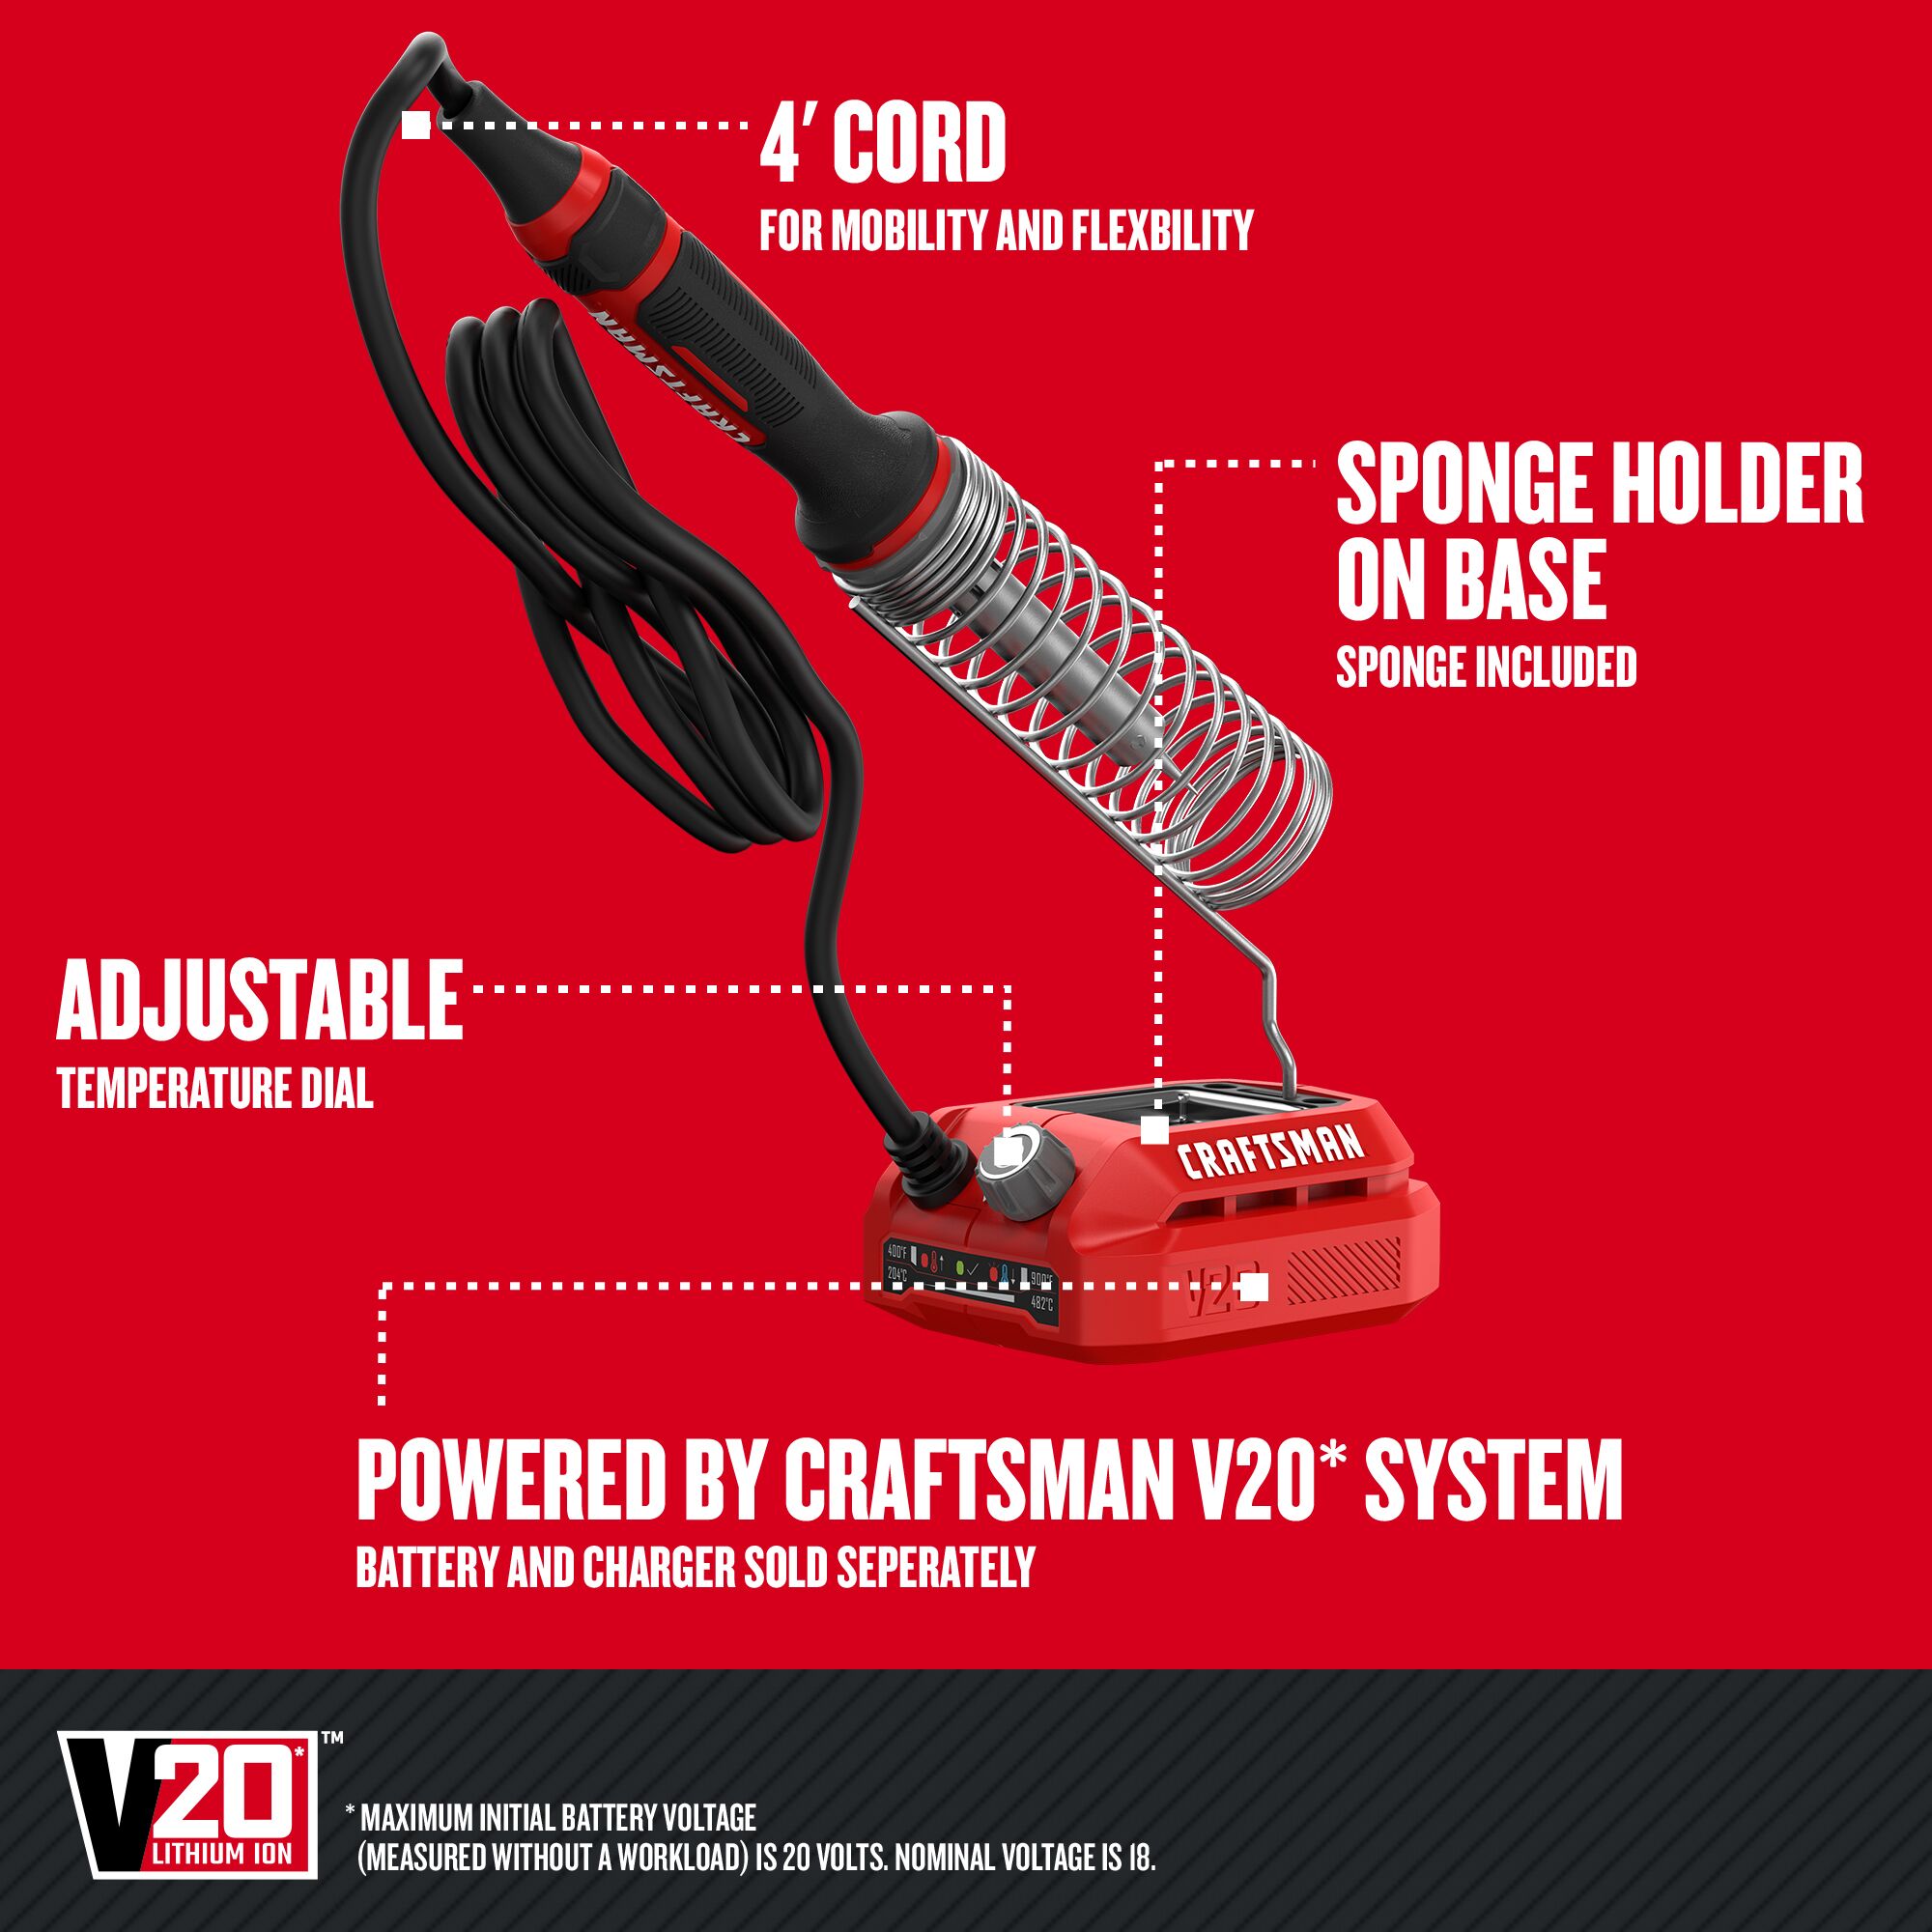 Walk-around graphic of product highlighting 4' cord, sponge holder on base, adjustable temperature dial, powered by CRAFTSMAN V20 system